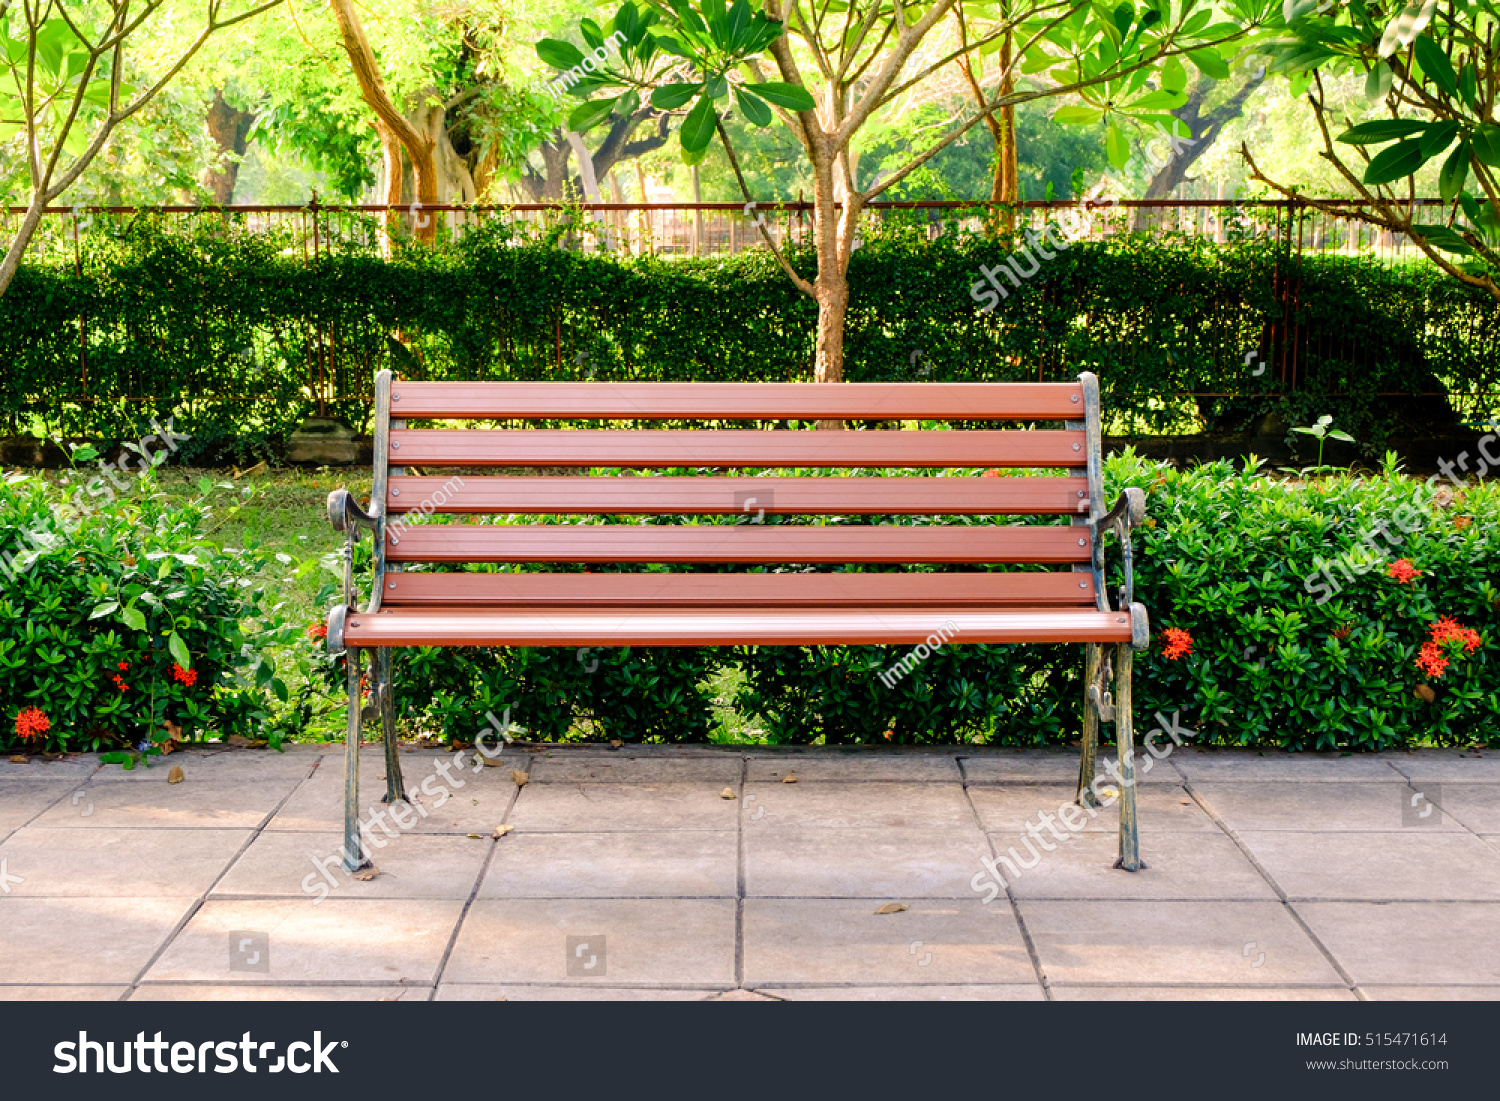 Wooden bench in the city park #515471614